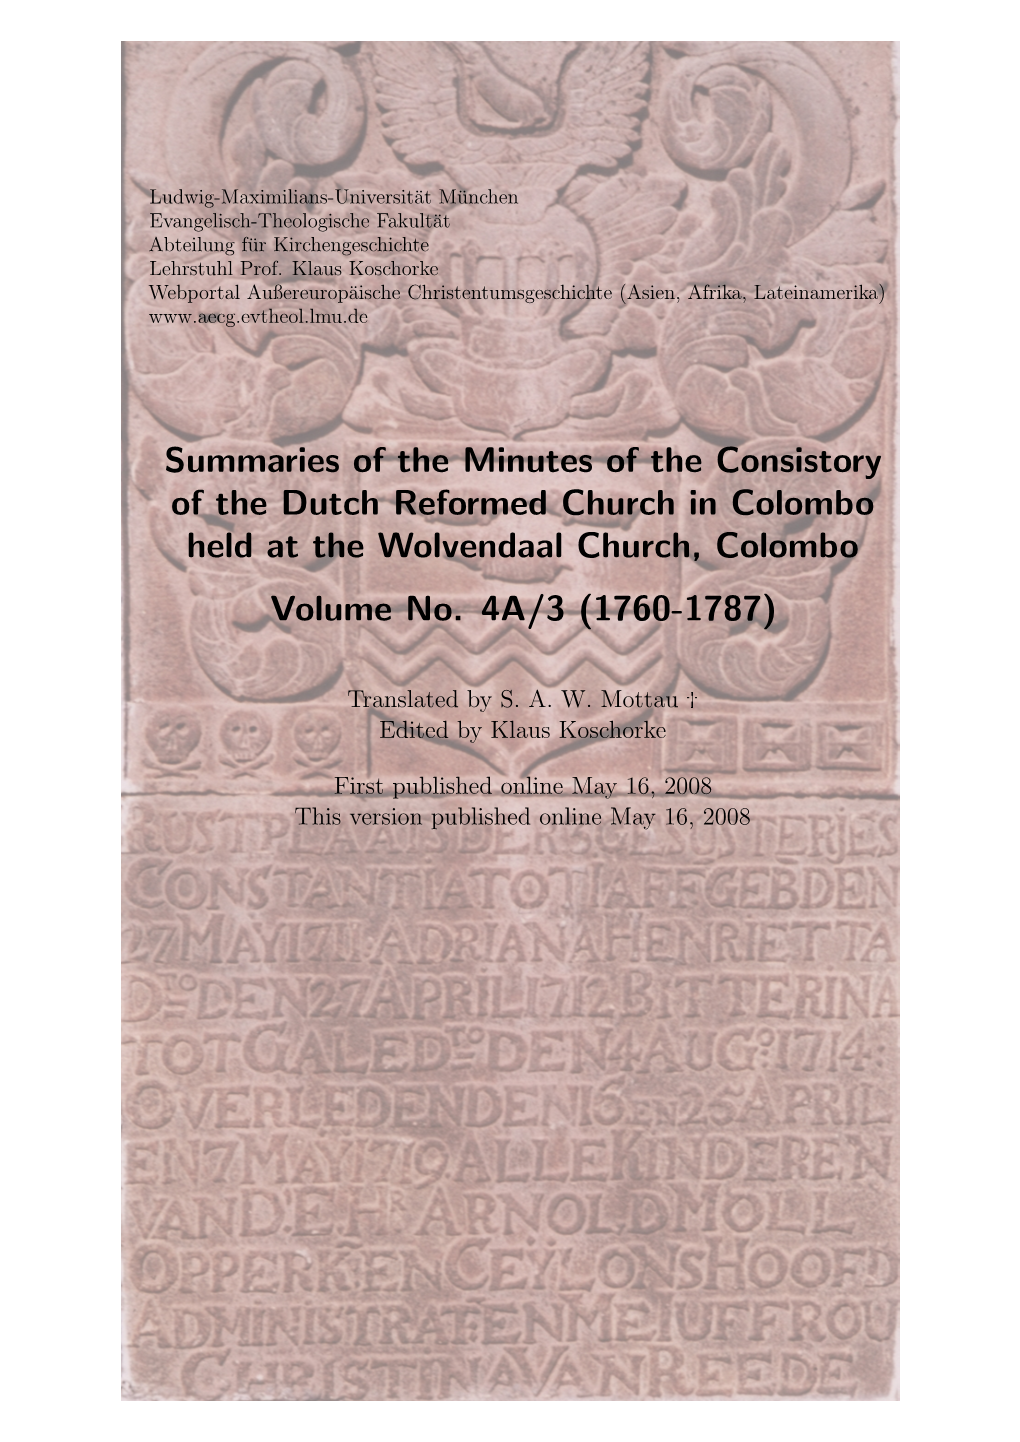 Summaries of the Minutes of the Consistory of the Dutch Reformed Church in Colombo Held at the Wolvendaal Church, Colombo Volume No